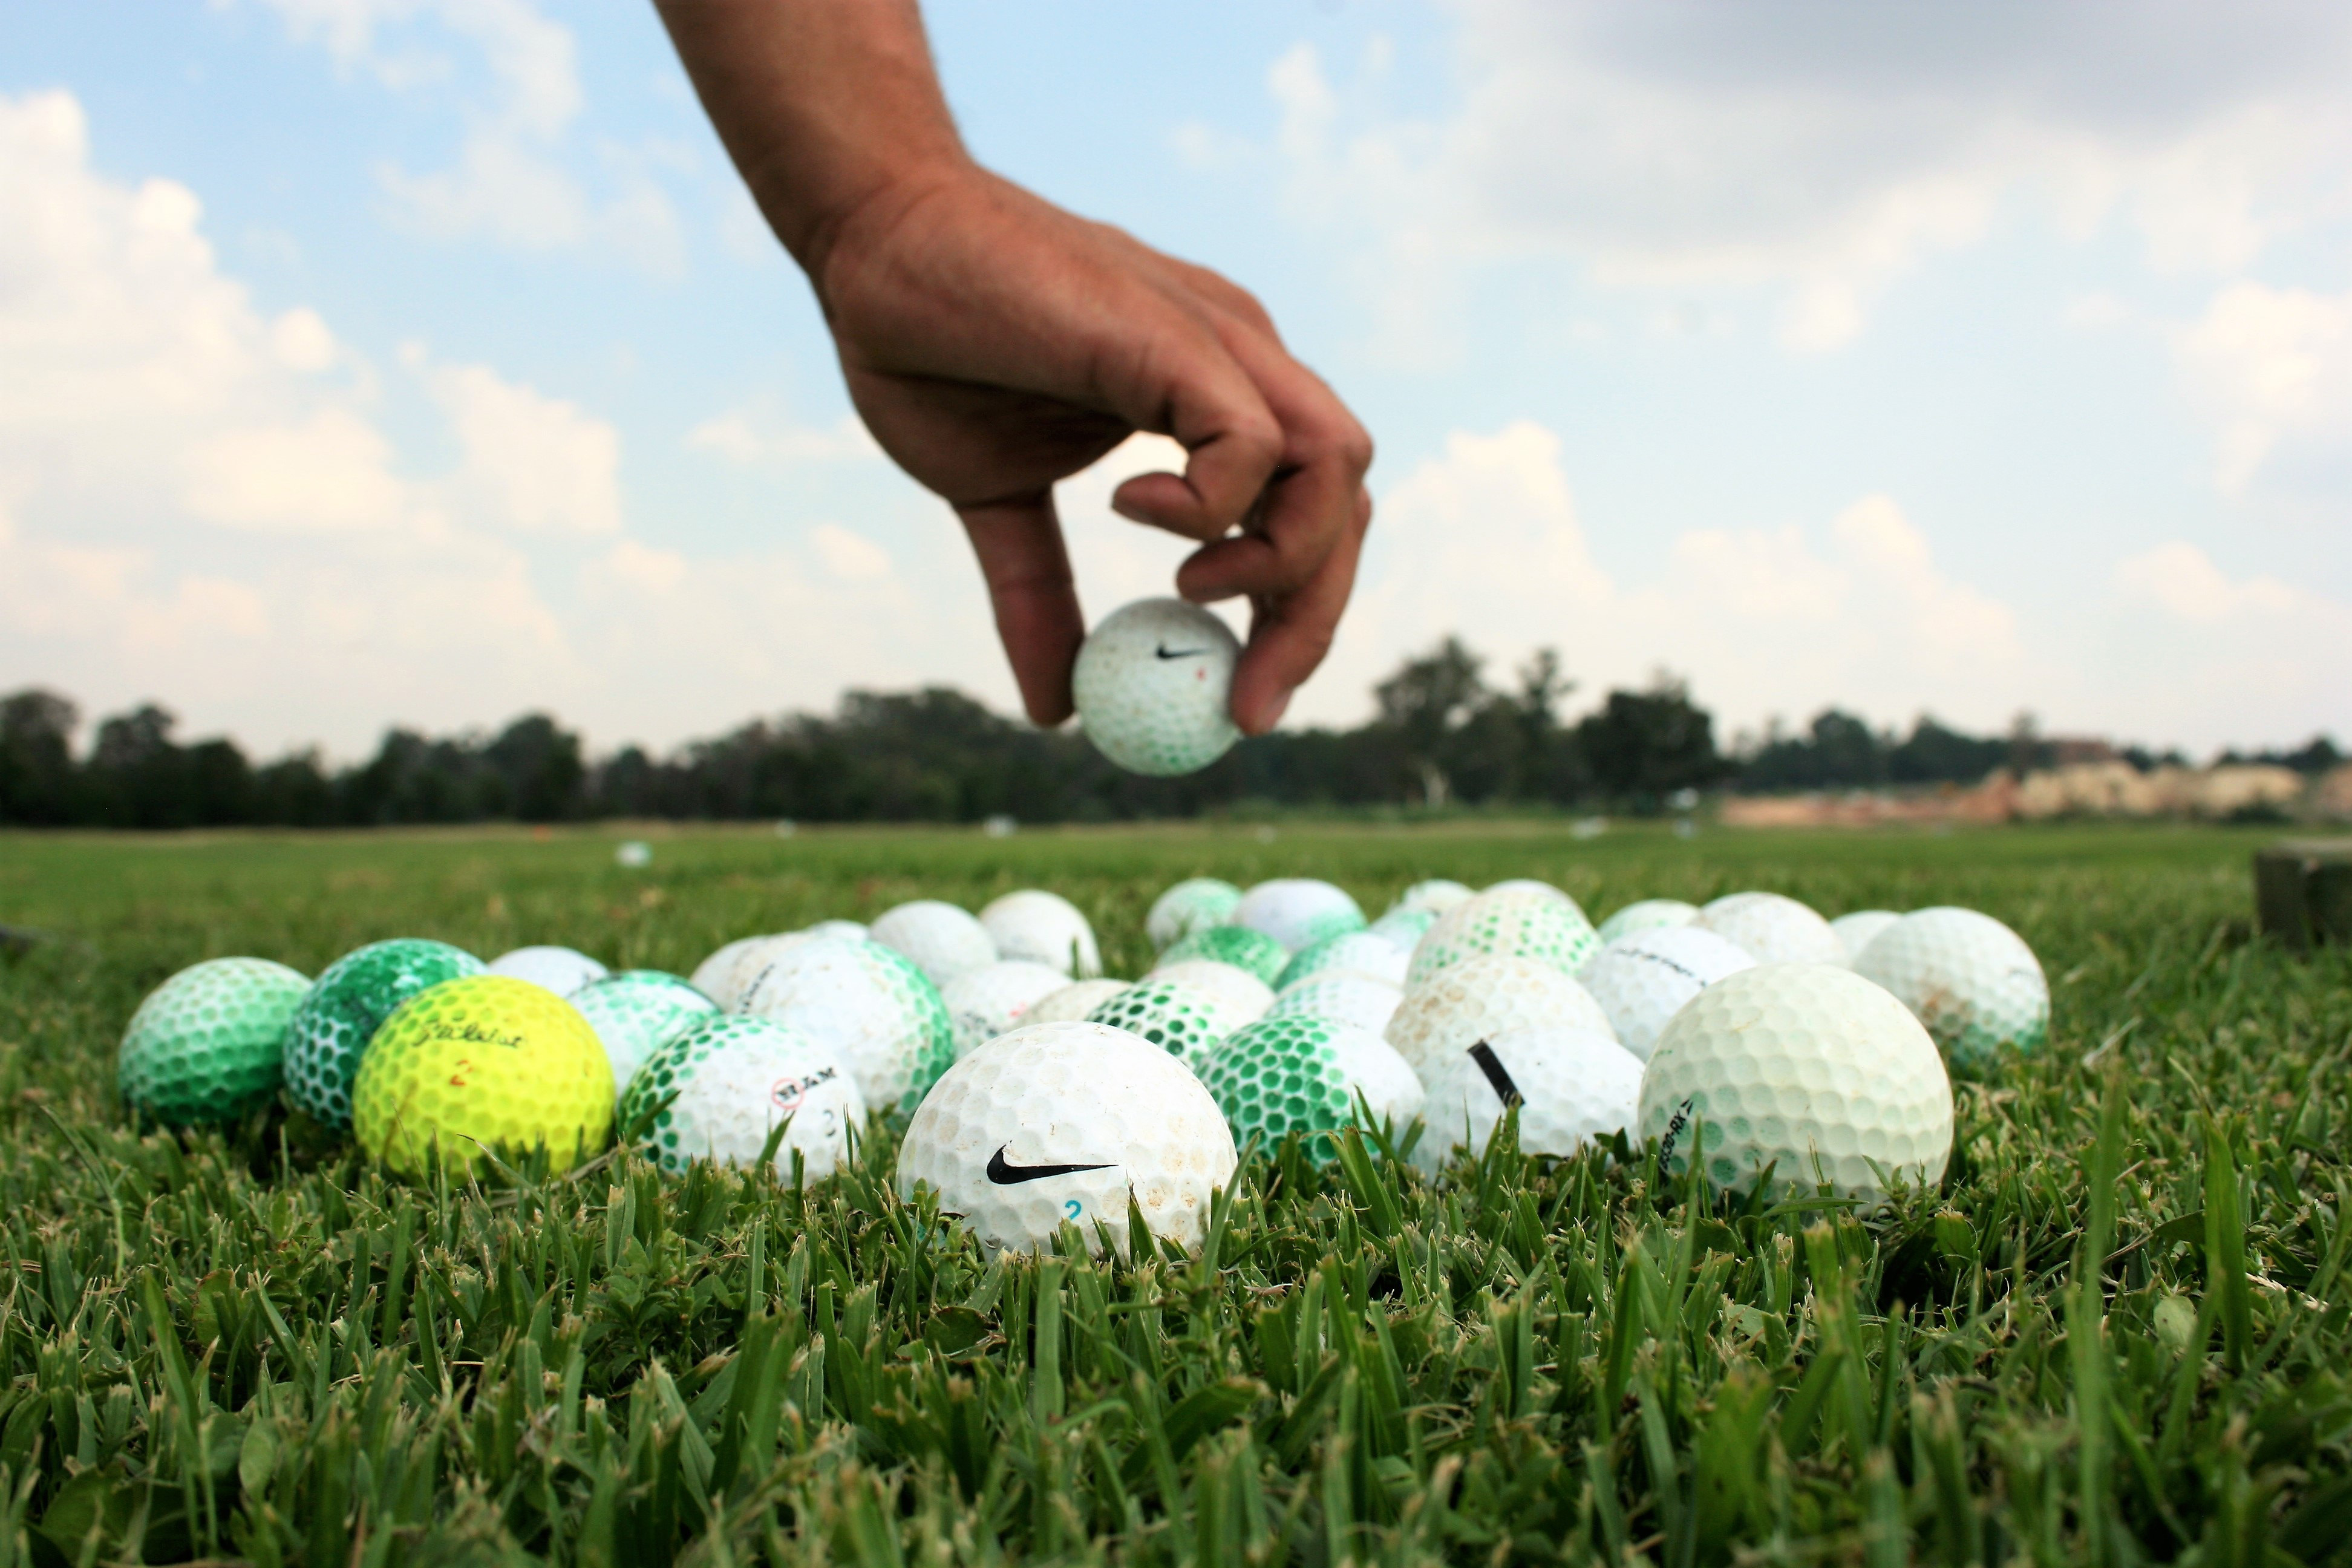 Golf Ball Selector: Know Which Ball to Use and How to Select